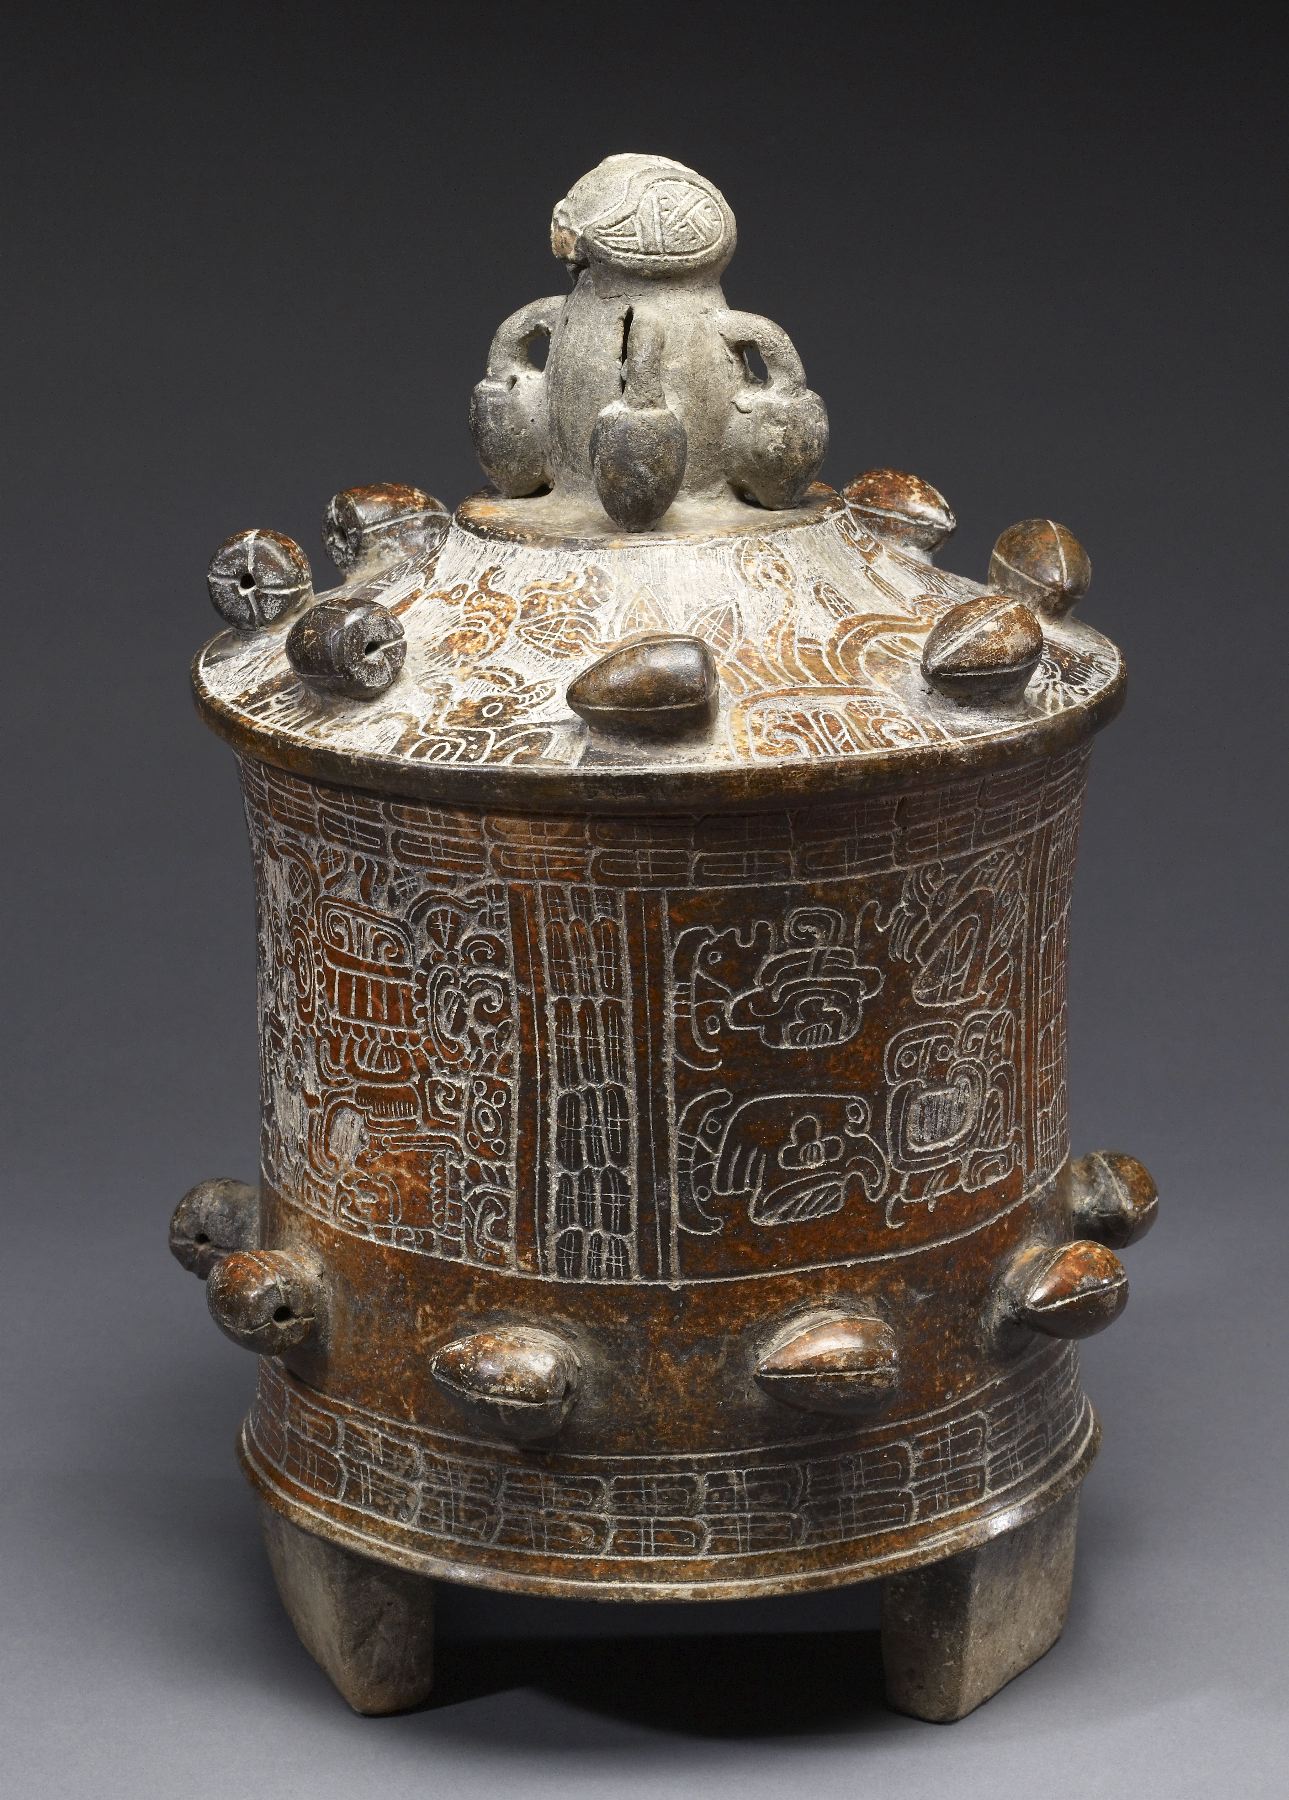 An earthenware Maya vessel for drinking chocolate, decorated with cacao beans, c. AD 250-550. Walters Art Museum (CC0).